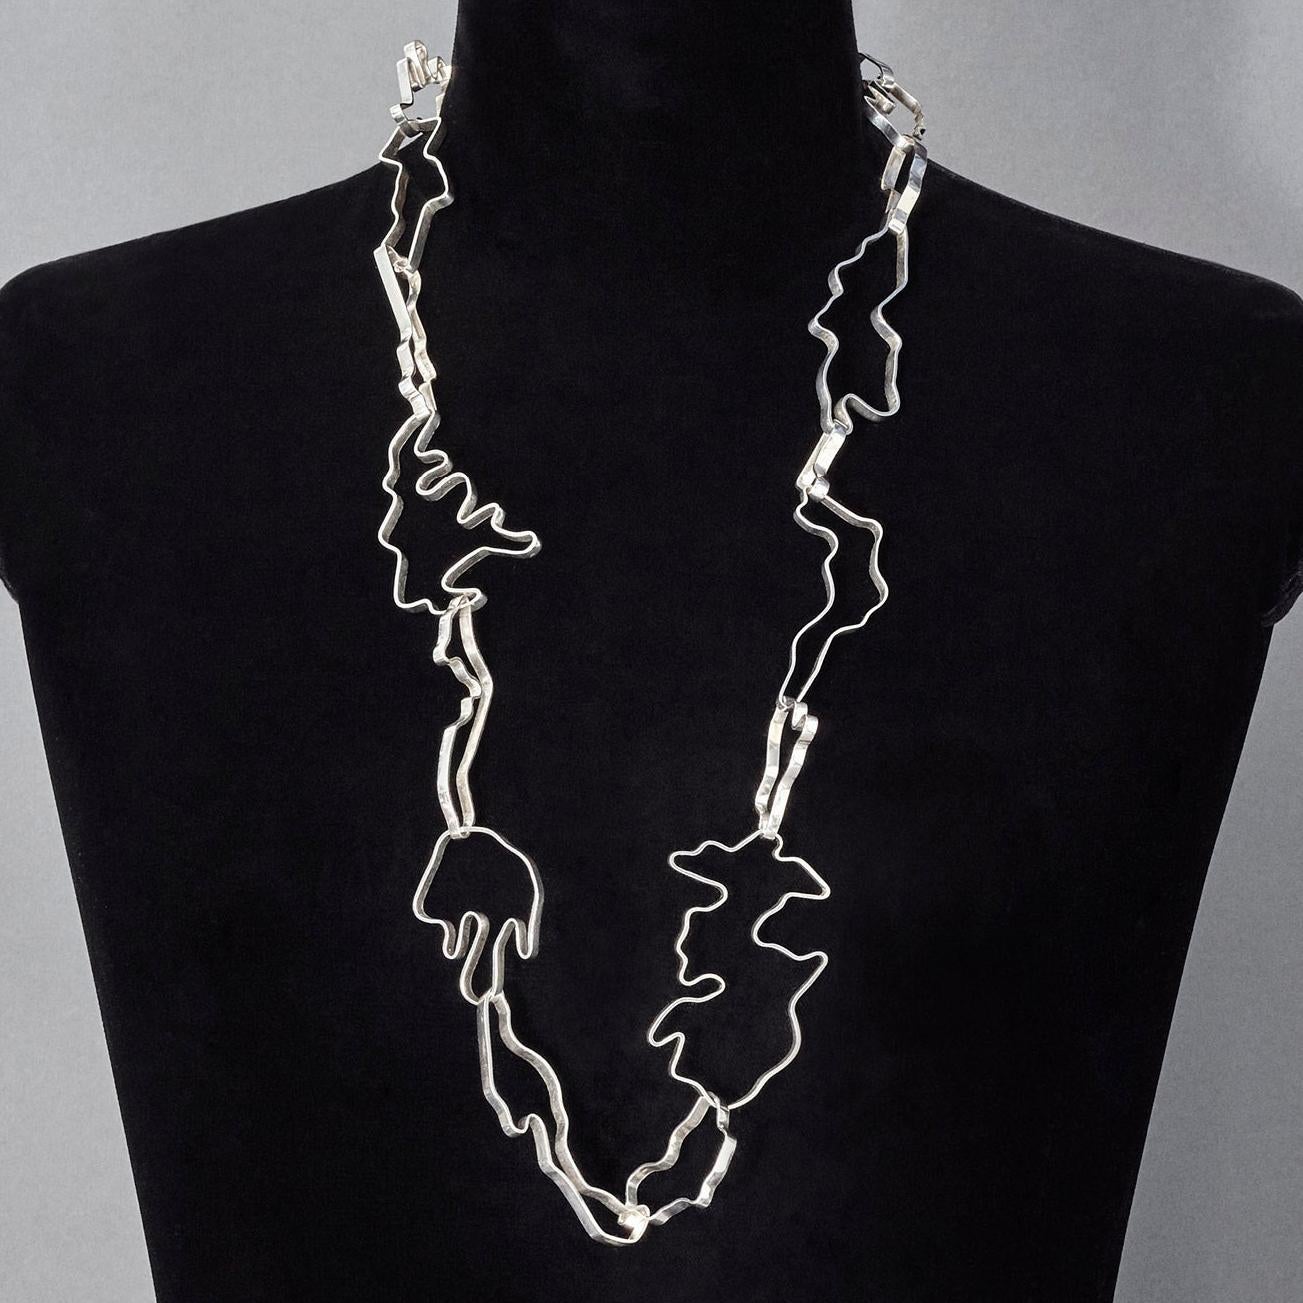 Made by hand in Nathalie Jean's Milan atelier in limited edition, the Informe Medium Chain link necklace is composed of 19 elements in polished sterling silver ribbon. Evoking by turns the gracious contemporary morphology of organic molecules or the